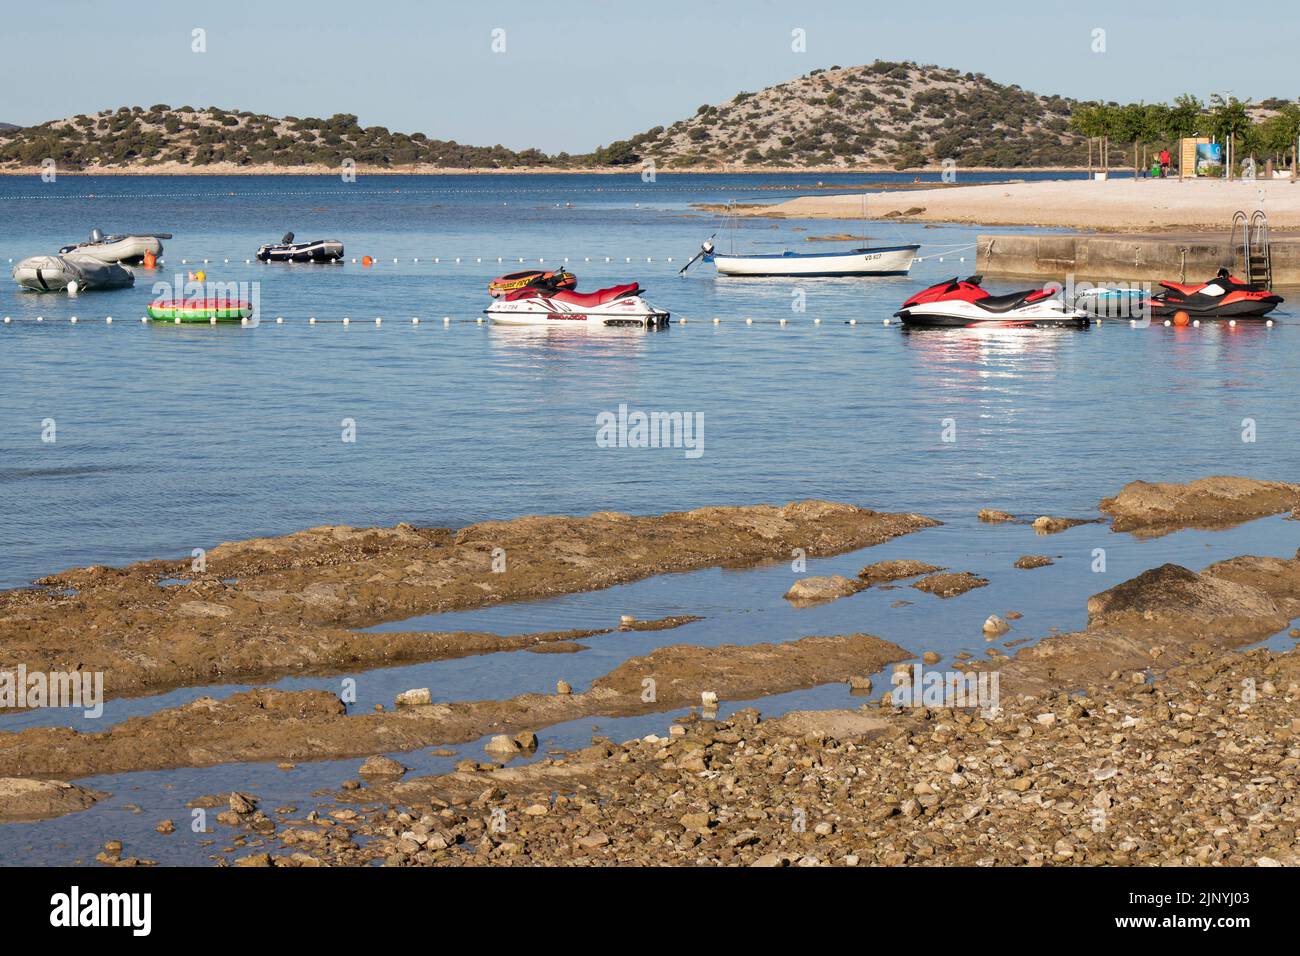 Vodice, Croatia - July 13, 2022: Water scooter and small boats moored by a pear next to an empty beach in Croatia Stock Photo